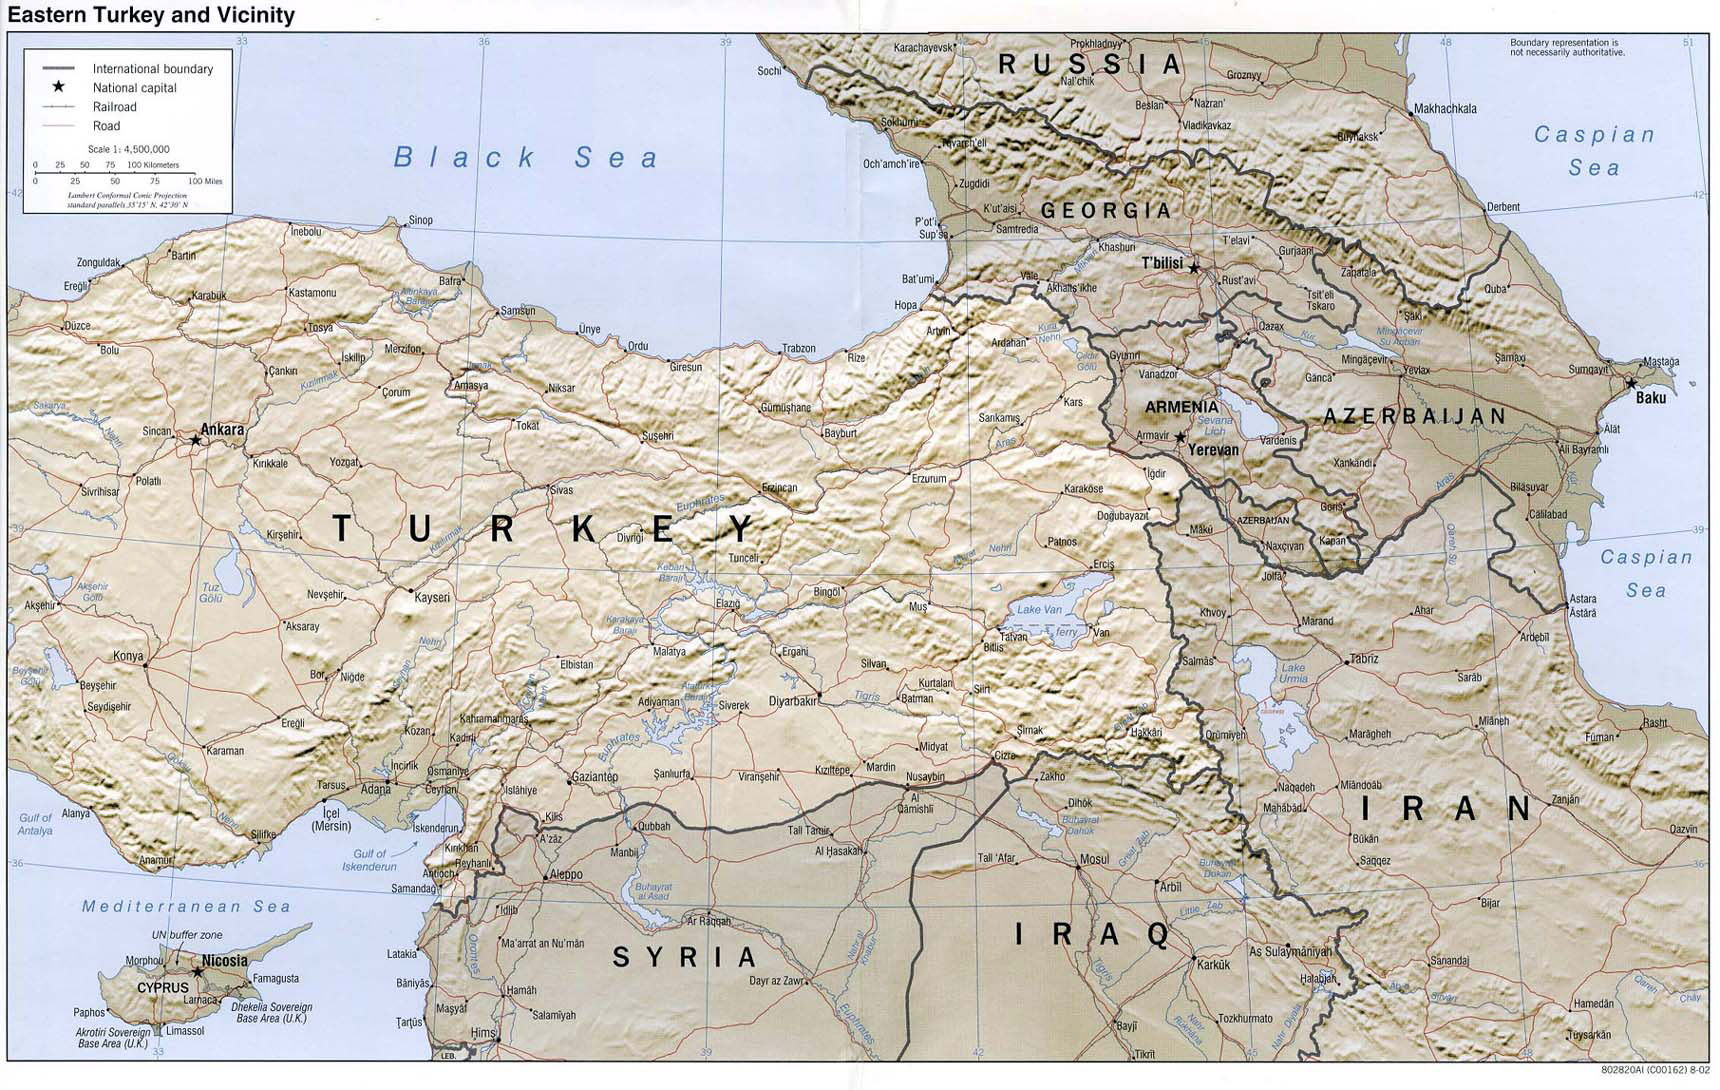 political map of turkey and surrounding countries